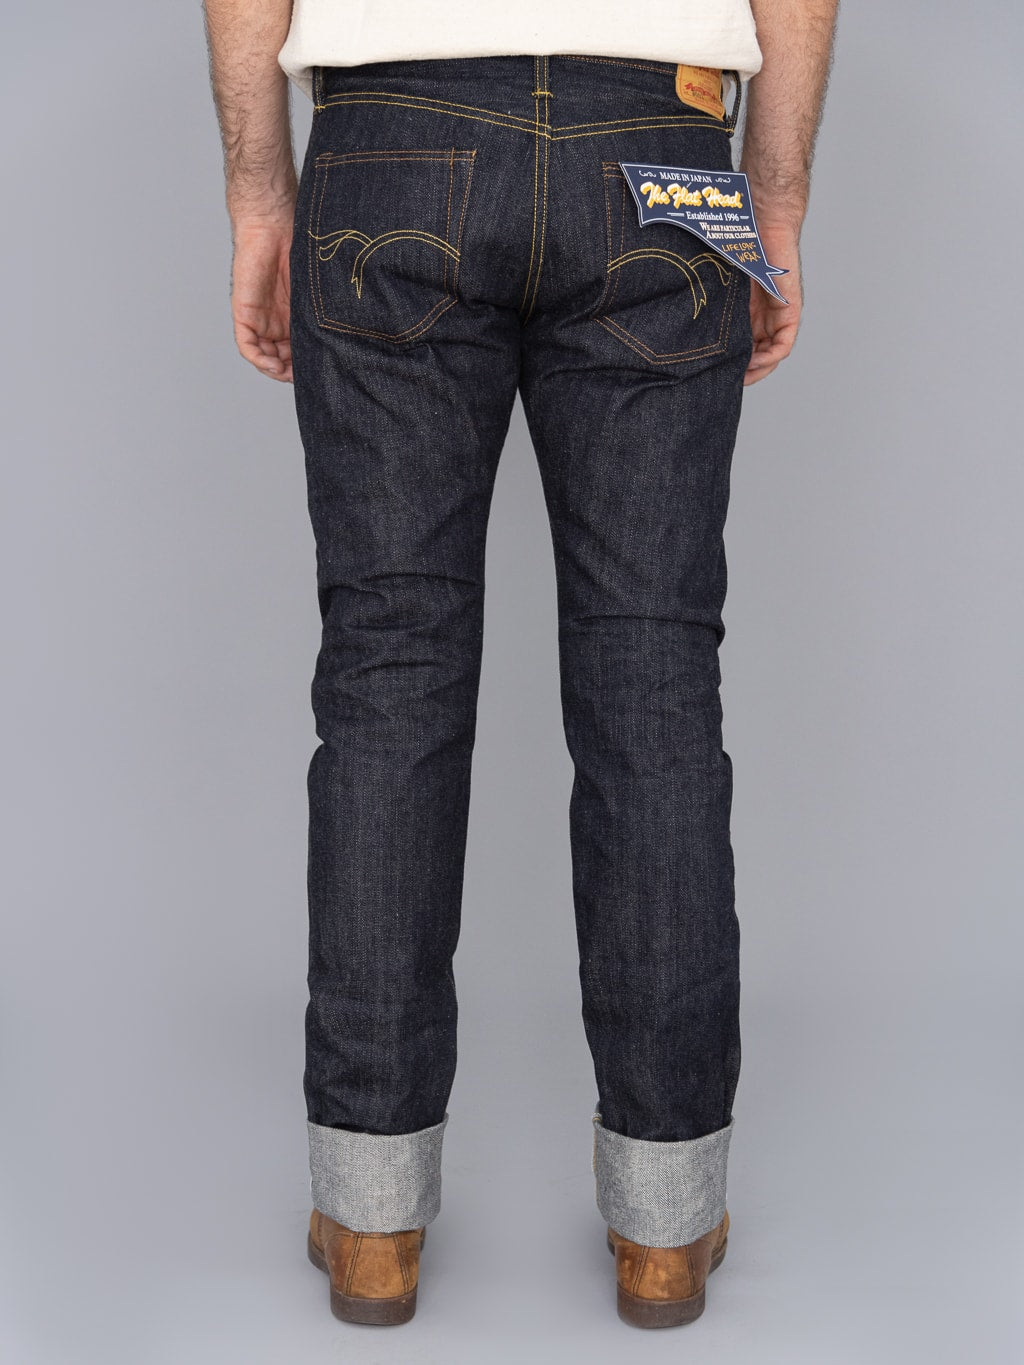 The Flat Head 3002 14.5oz Slim Tapered selvedge Jeans back fit